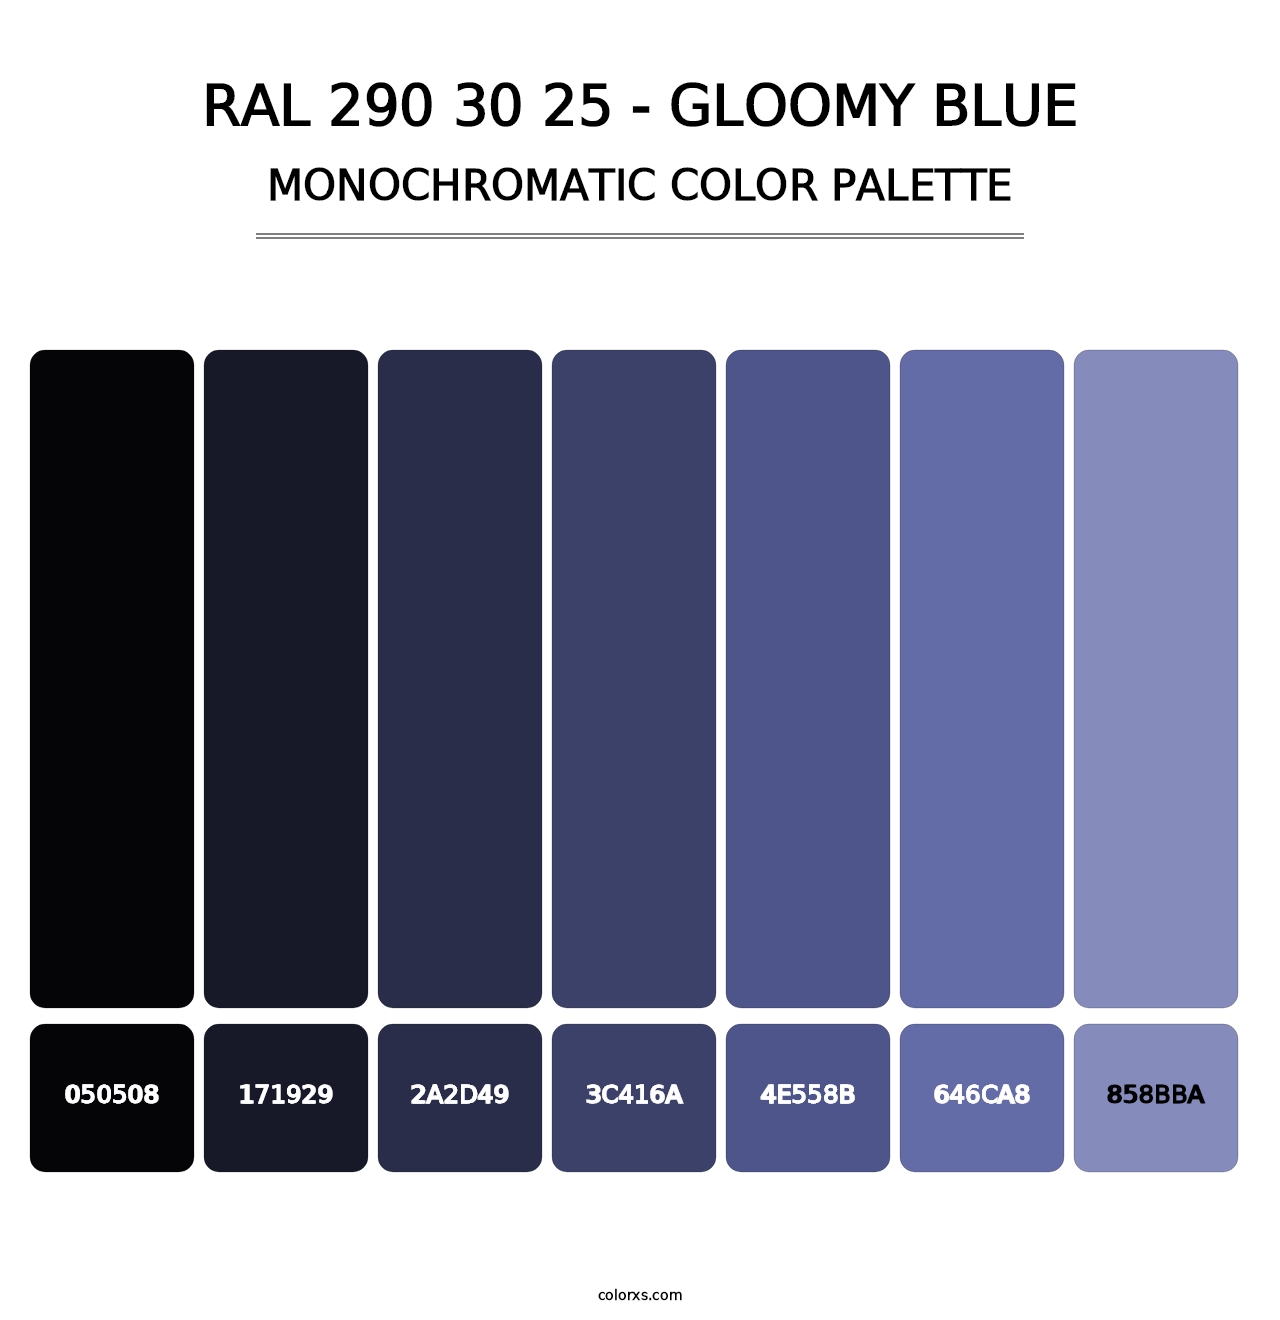 RAL 290 30 25 - Gloomy Blue - Monochromatic Color Palette